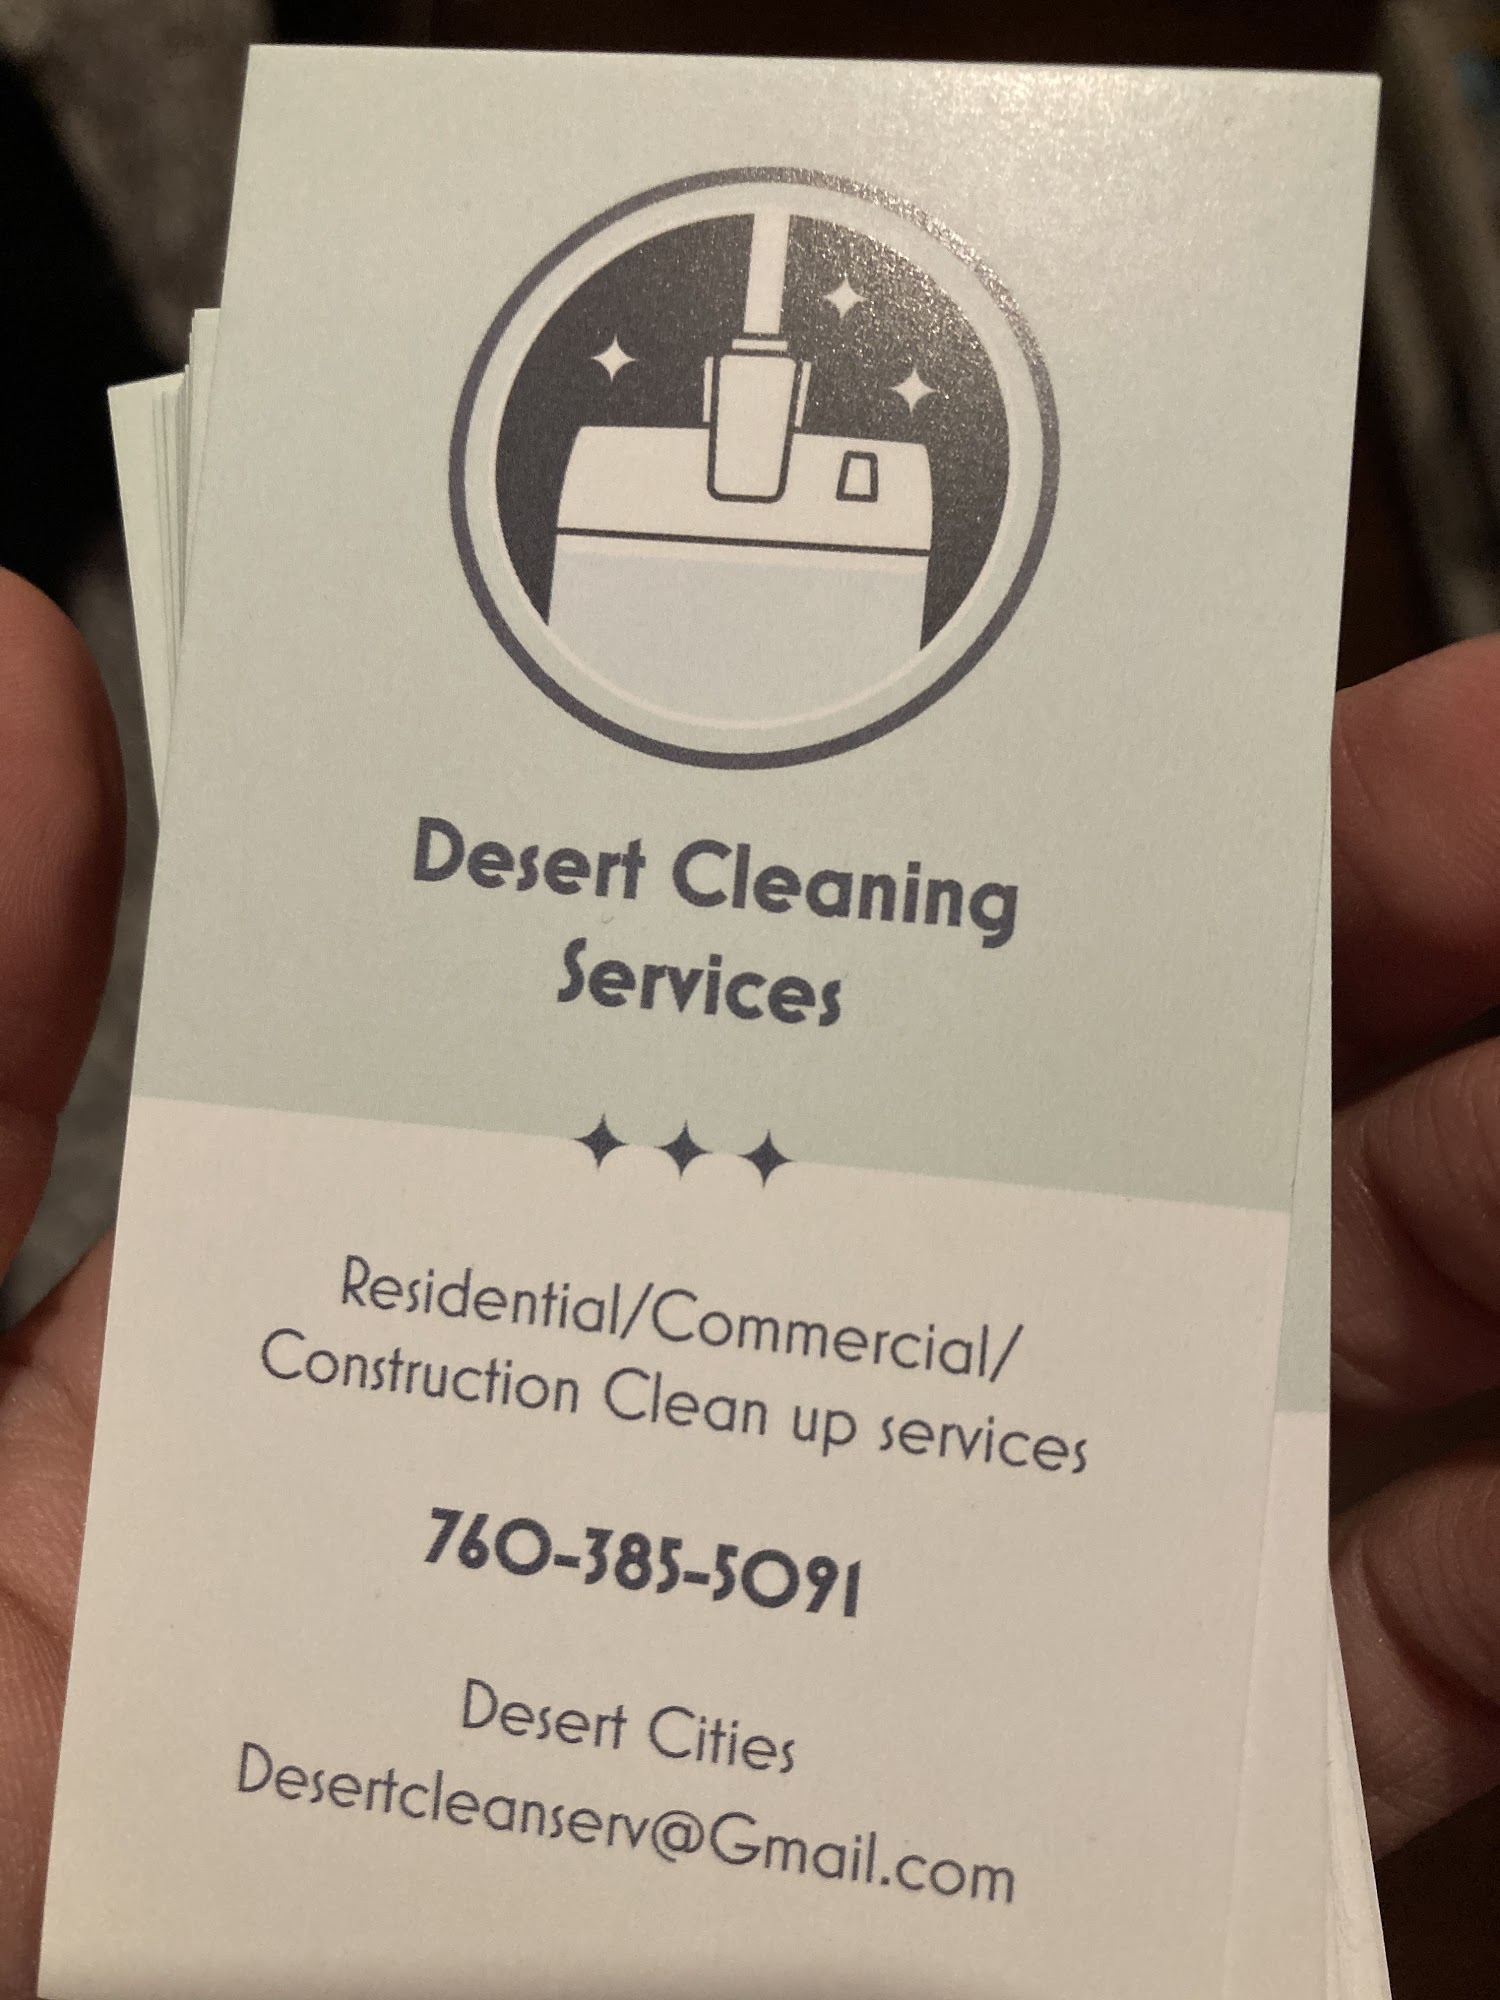 Desert Cleaning Services